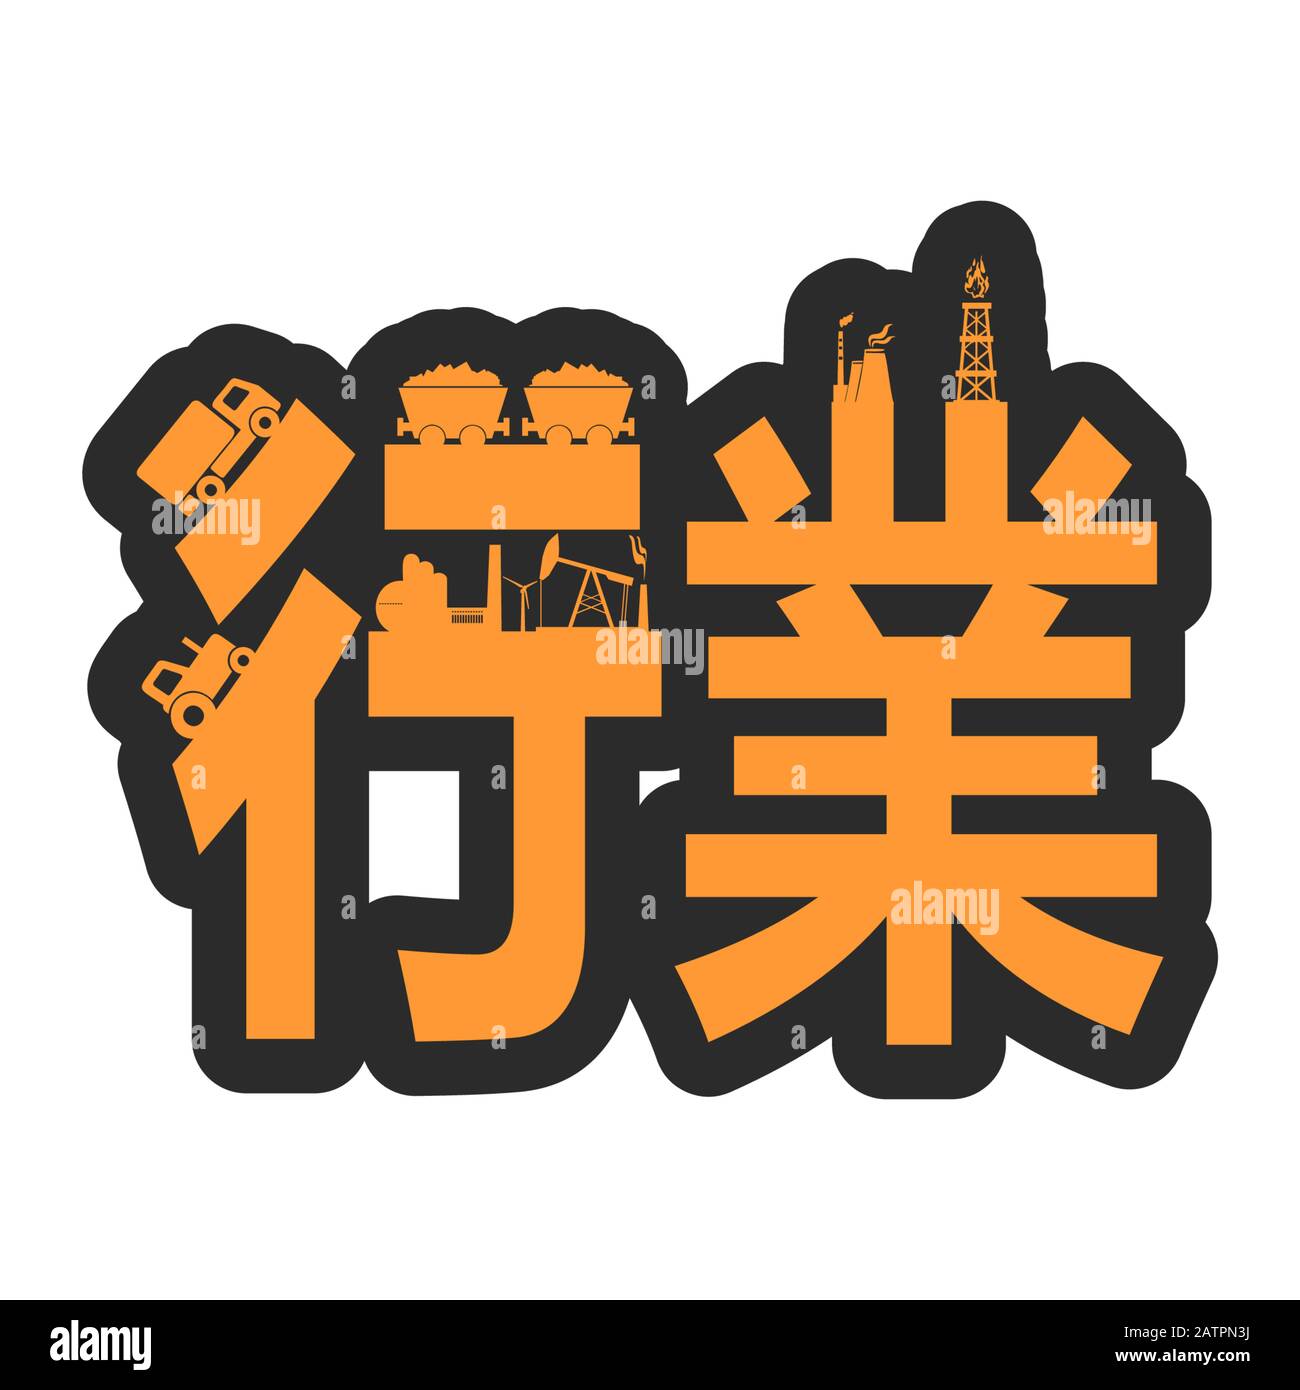 Chinese hieroglyph that mean industry. Stock Vector